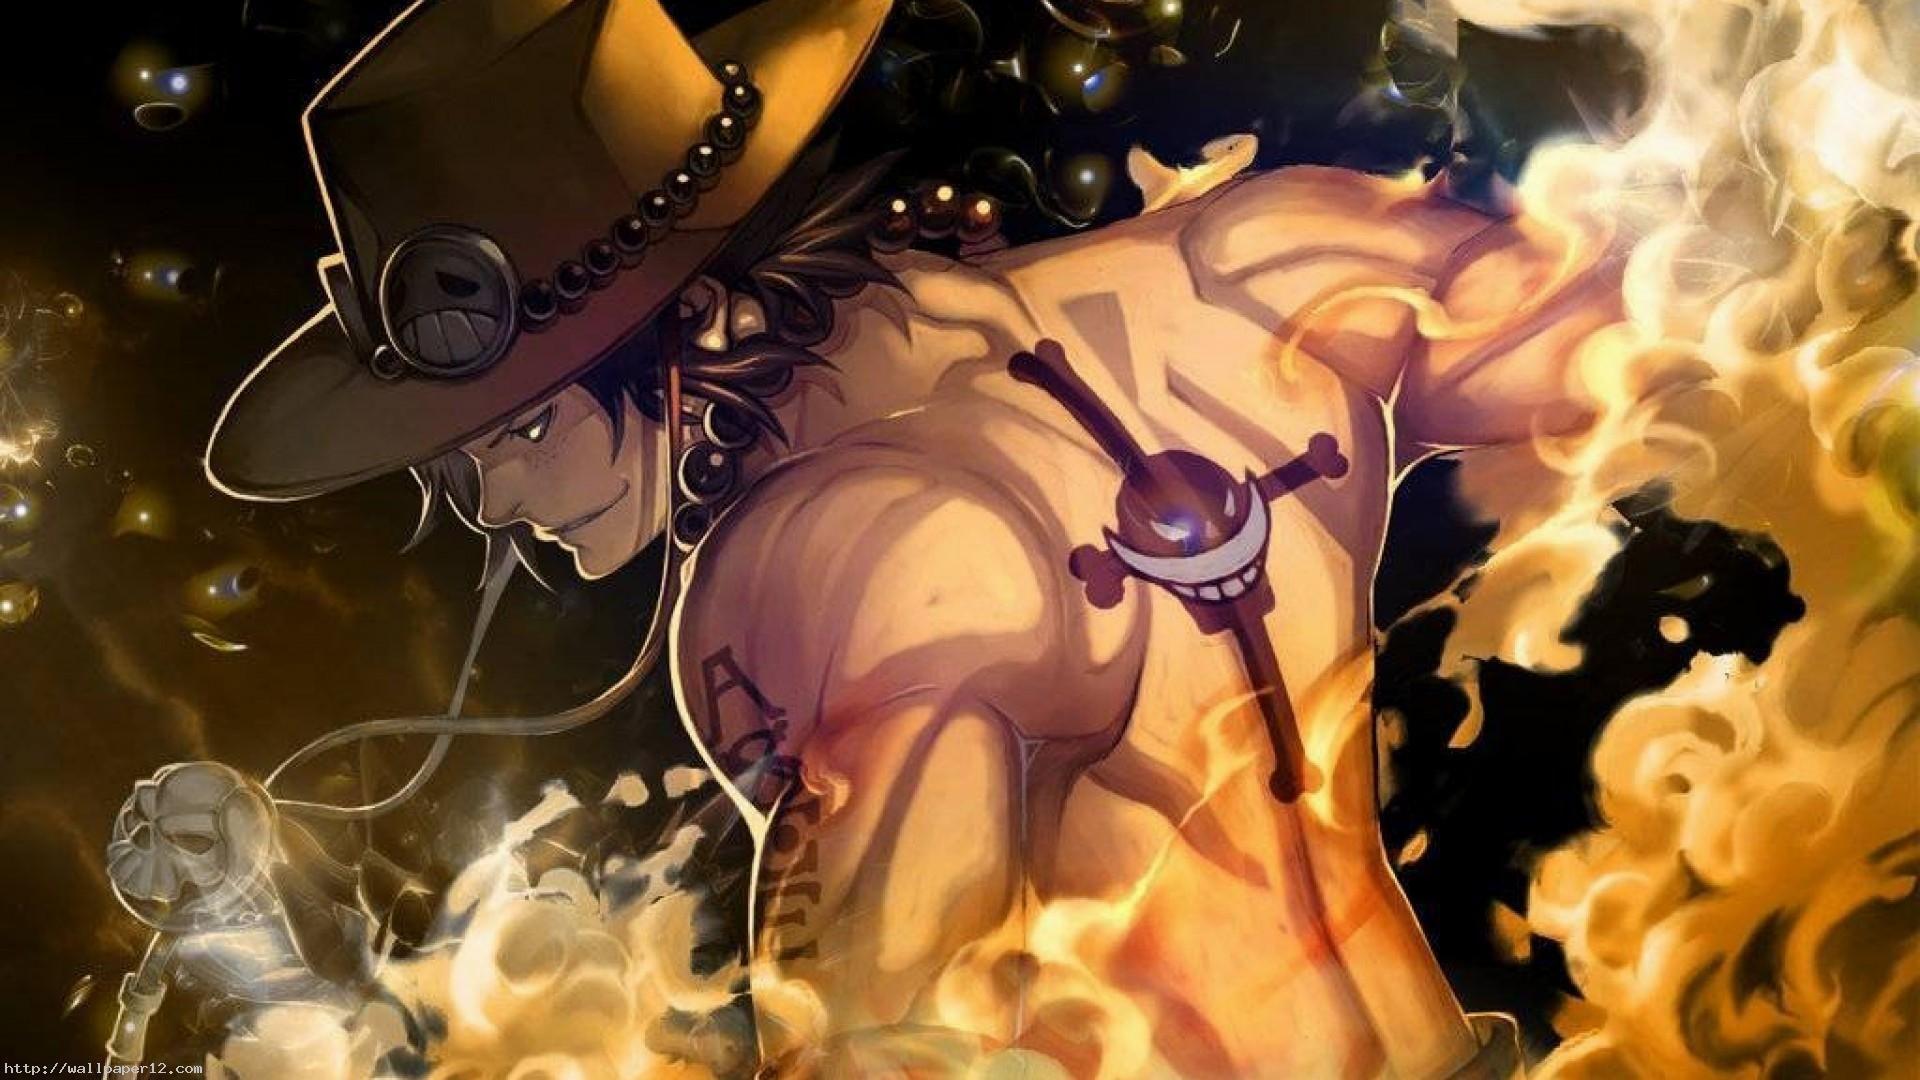 Ace One Piece Wallpapers Hd - Wallpaper Cave